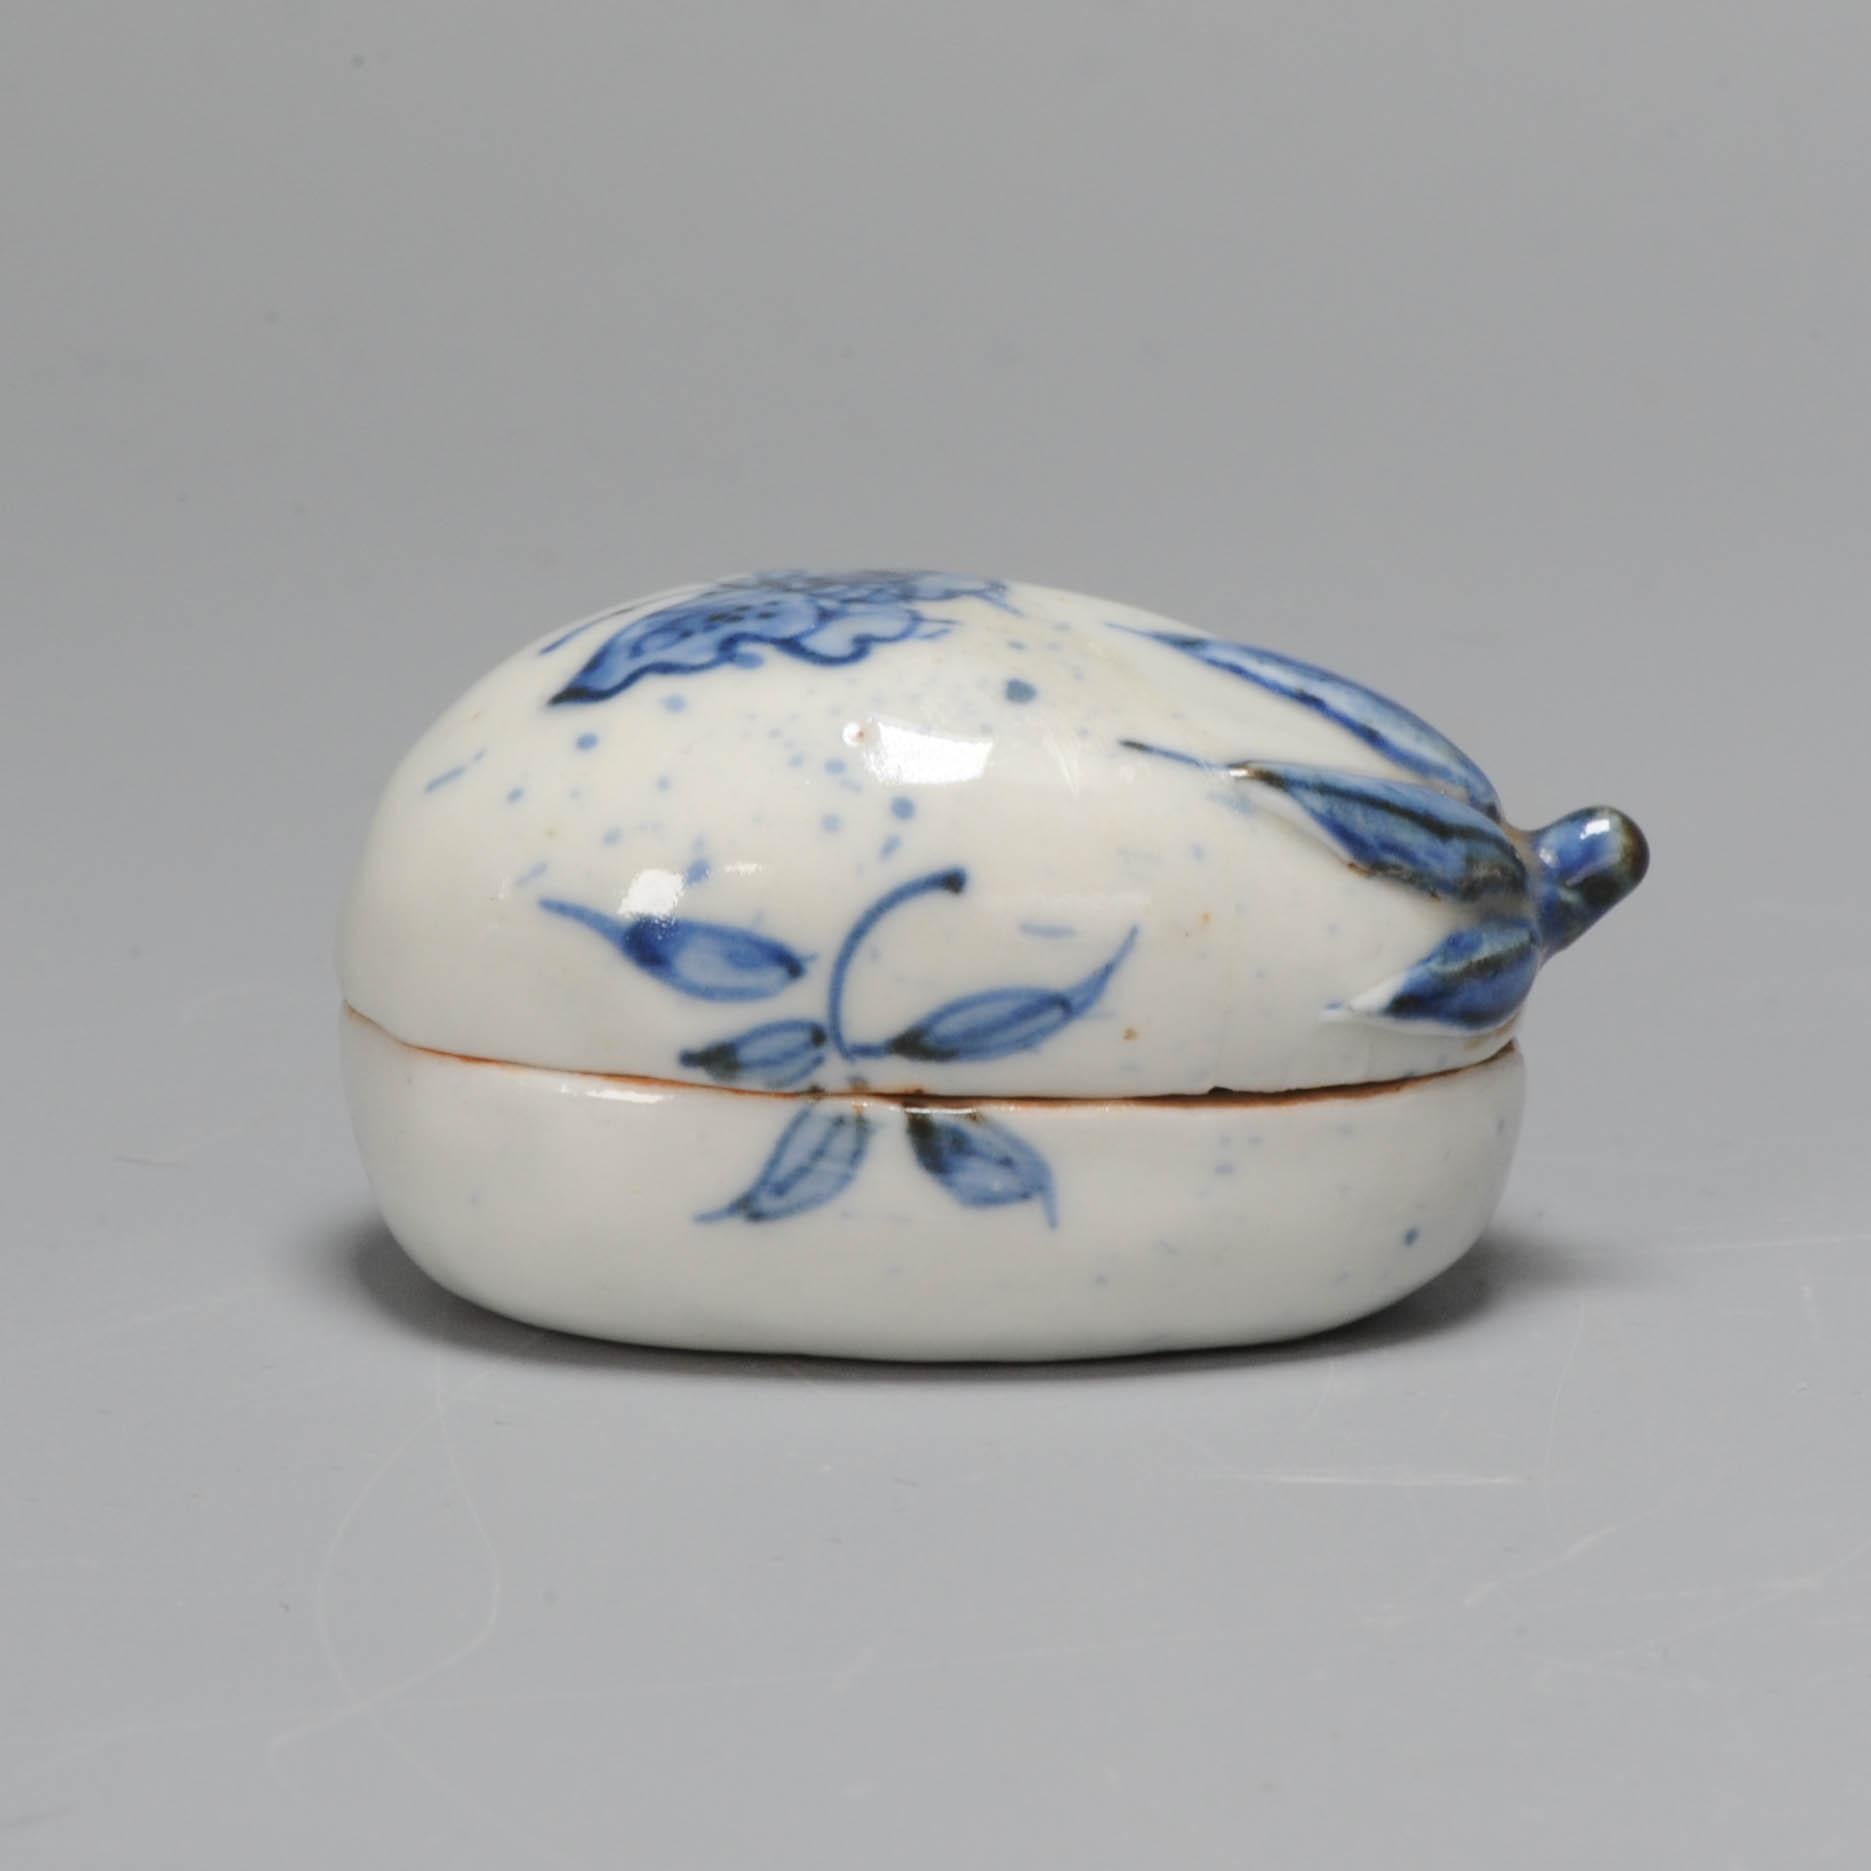 Rare Ca 1600 Chinese Porcelain Ming Period Kosometsuke Incense Box Fruit For Sale 2